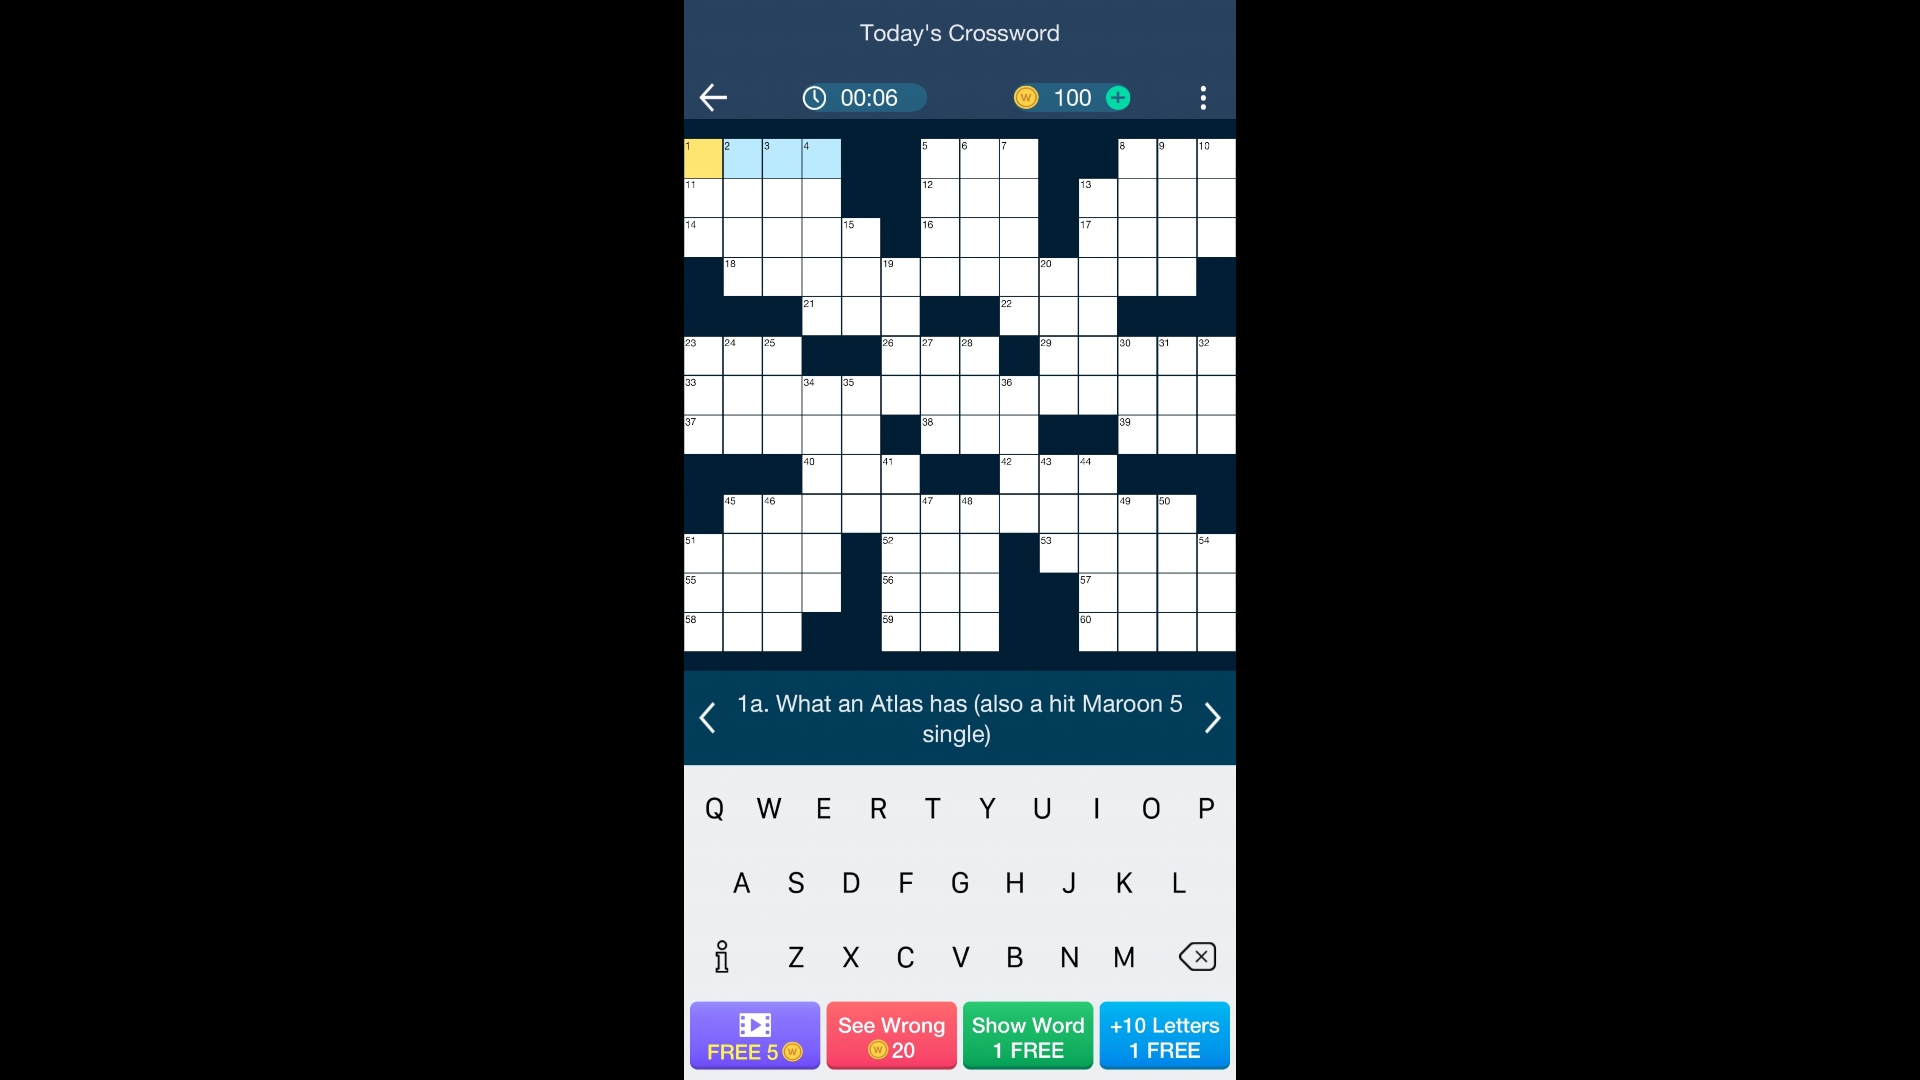 Best word games: Daily Themed Crossword Puzzles. Image shows a crossword game in progress.